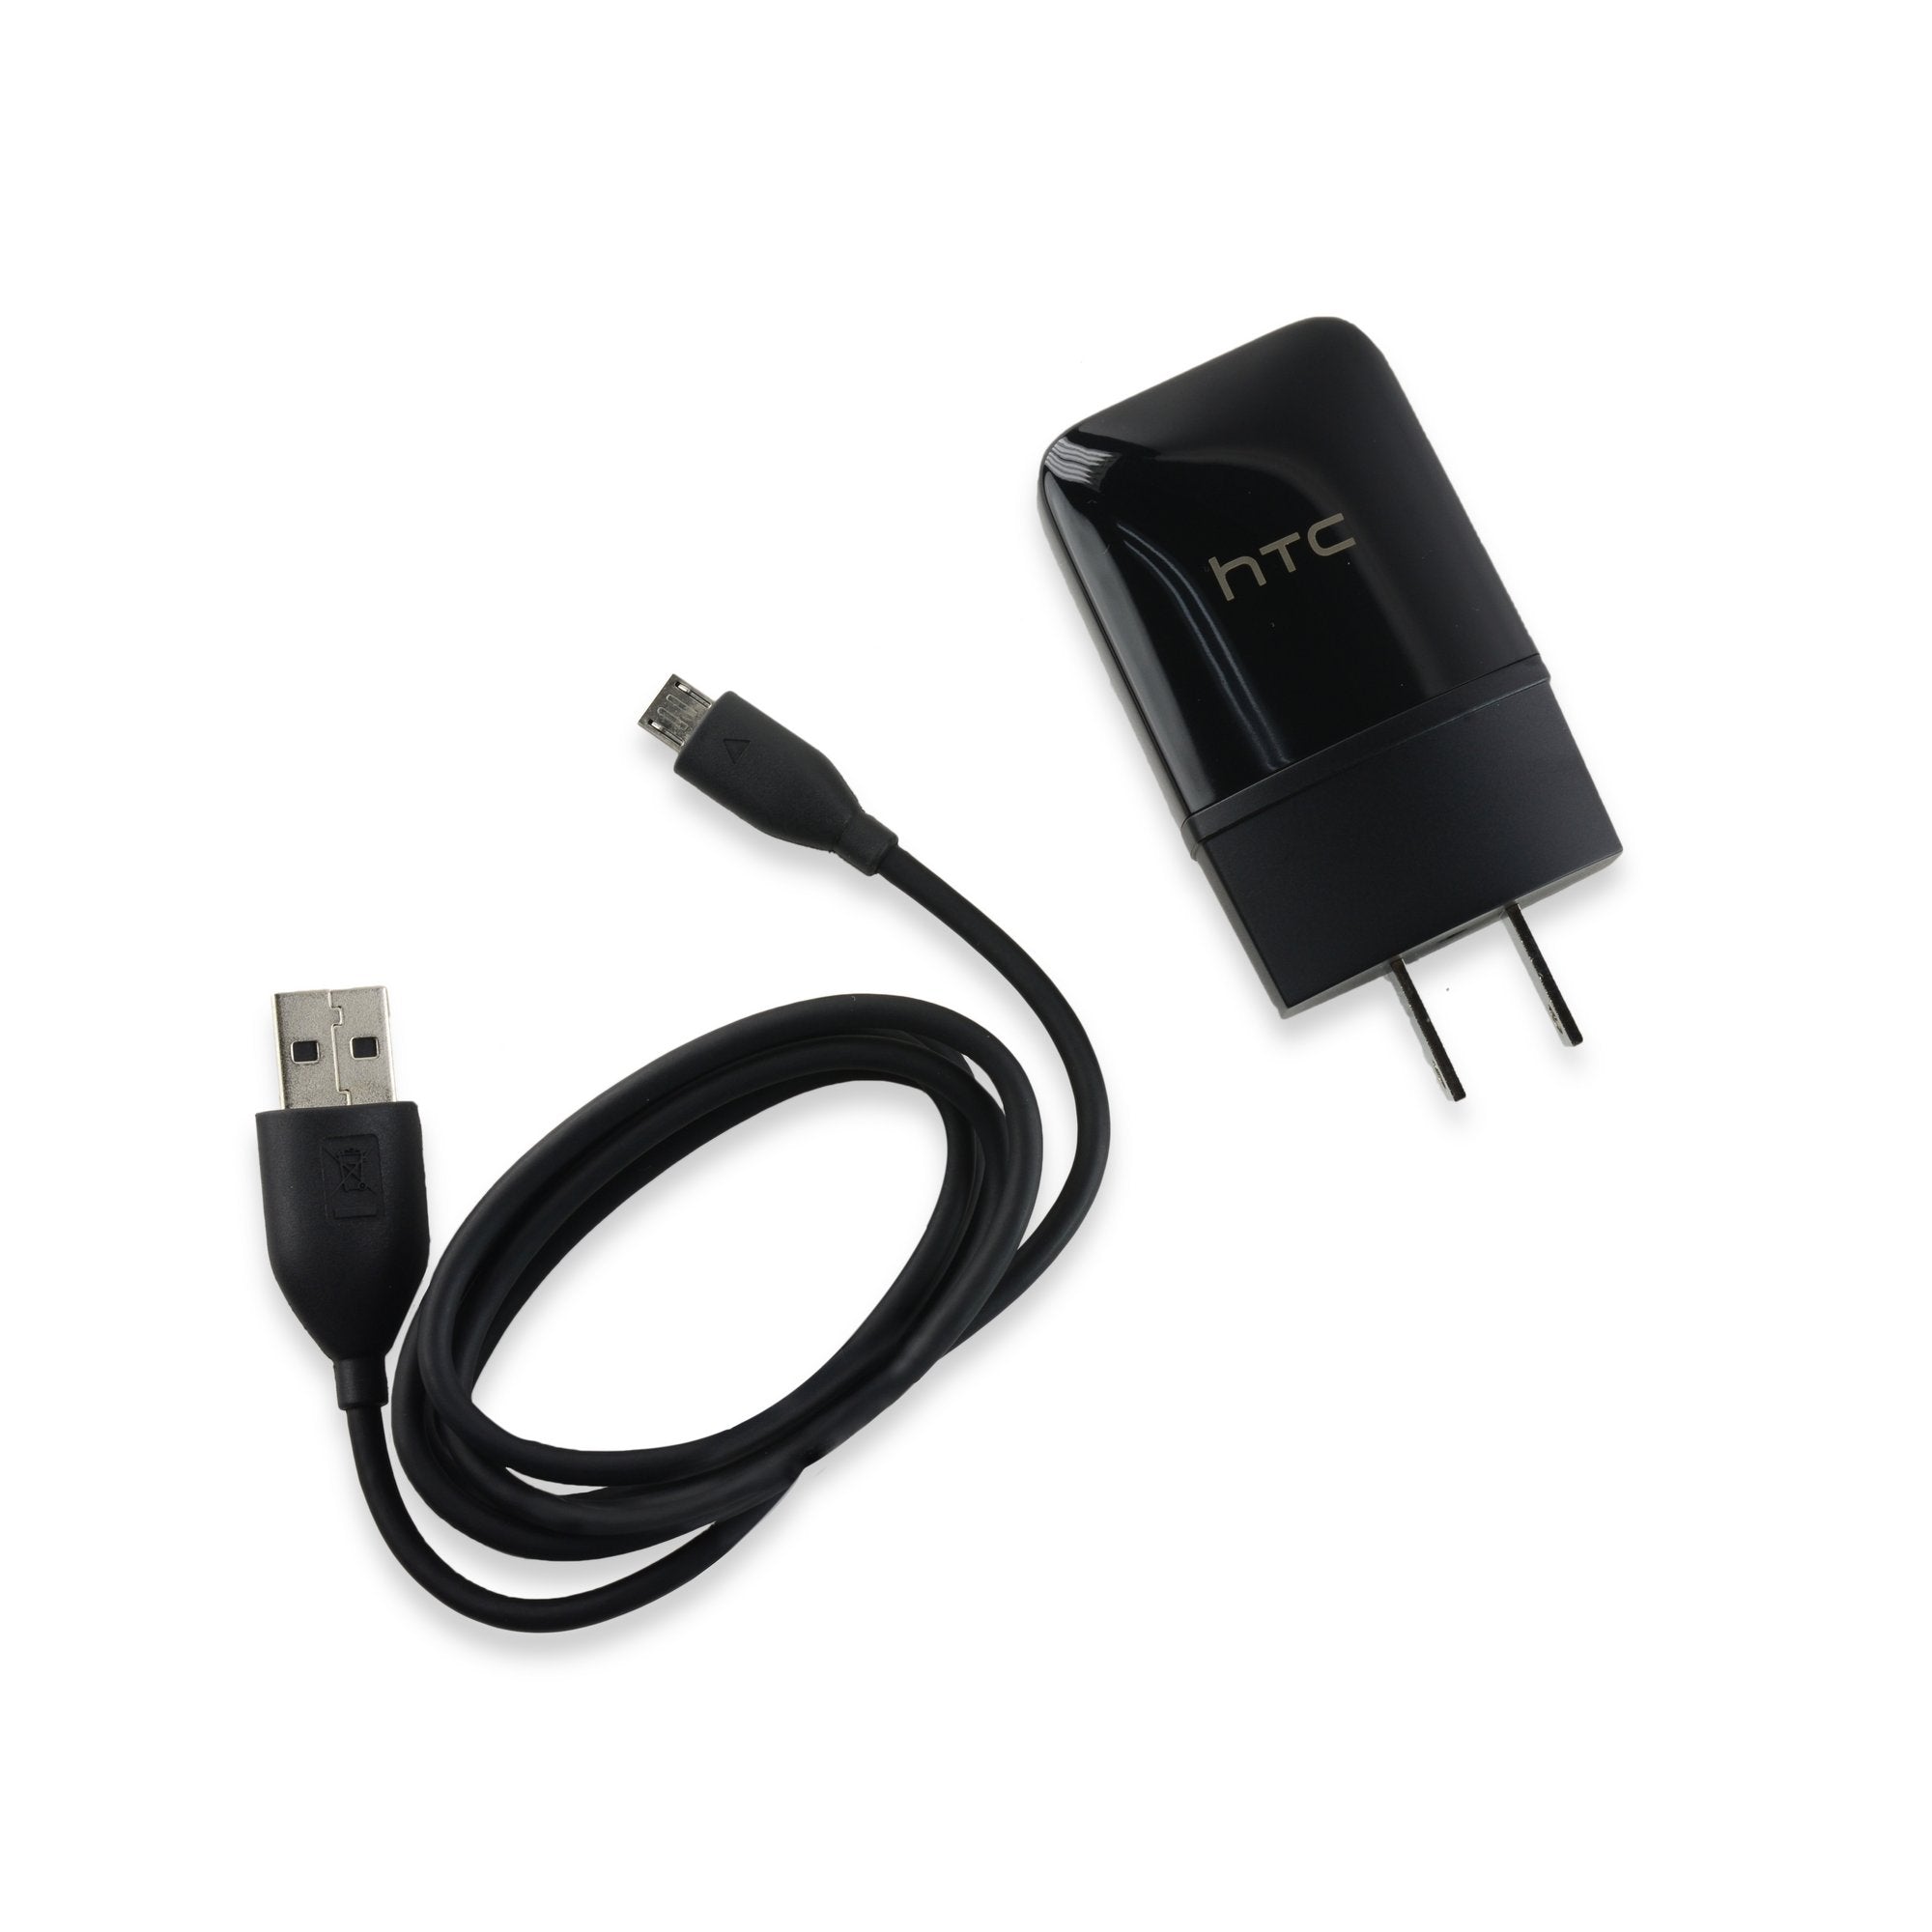 Nexus 9 AC Power Adapter and Charging Cable